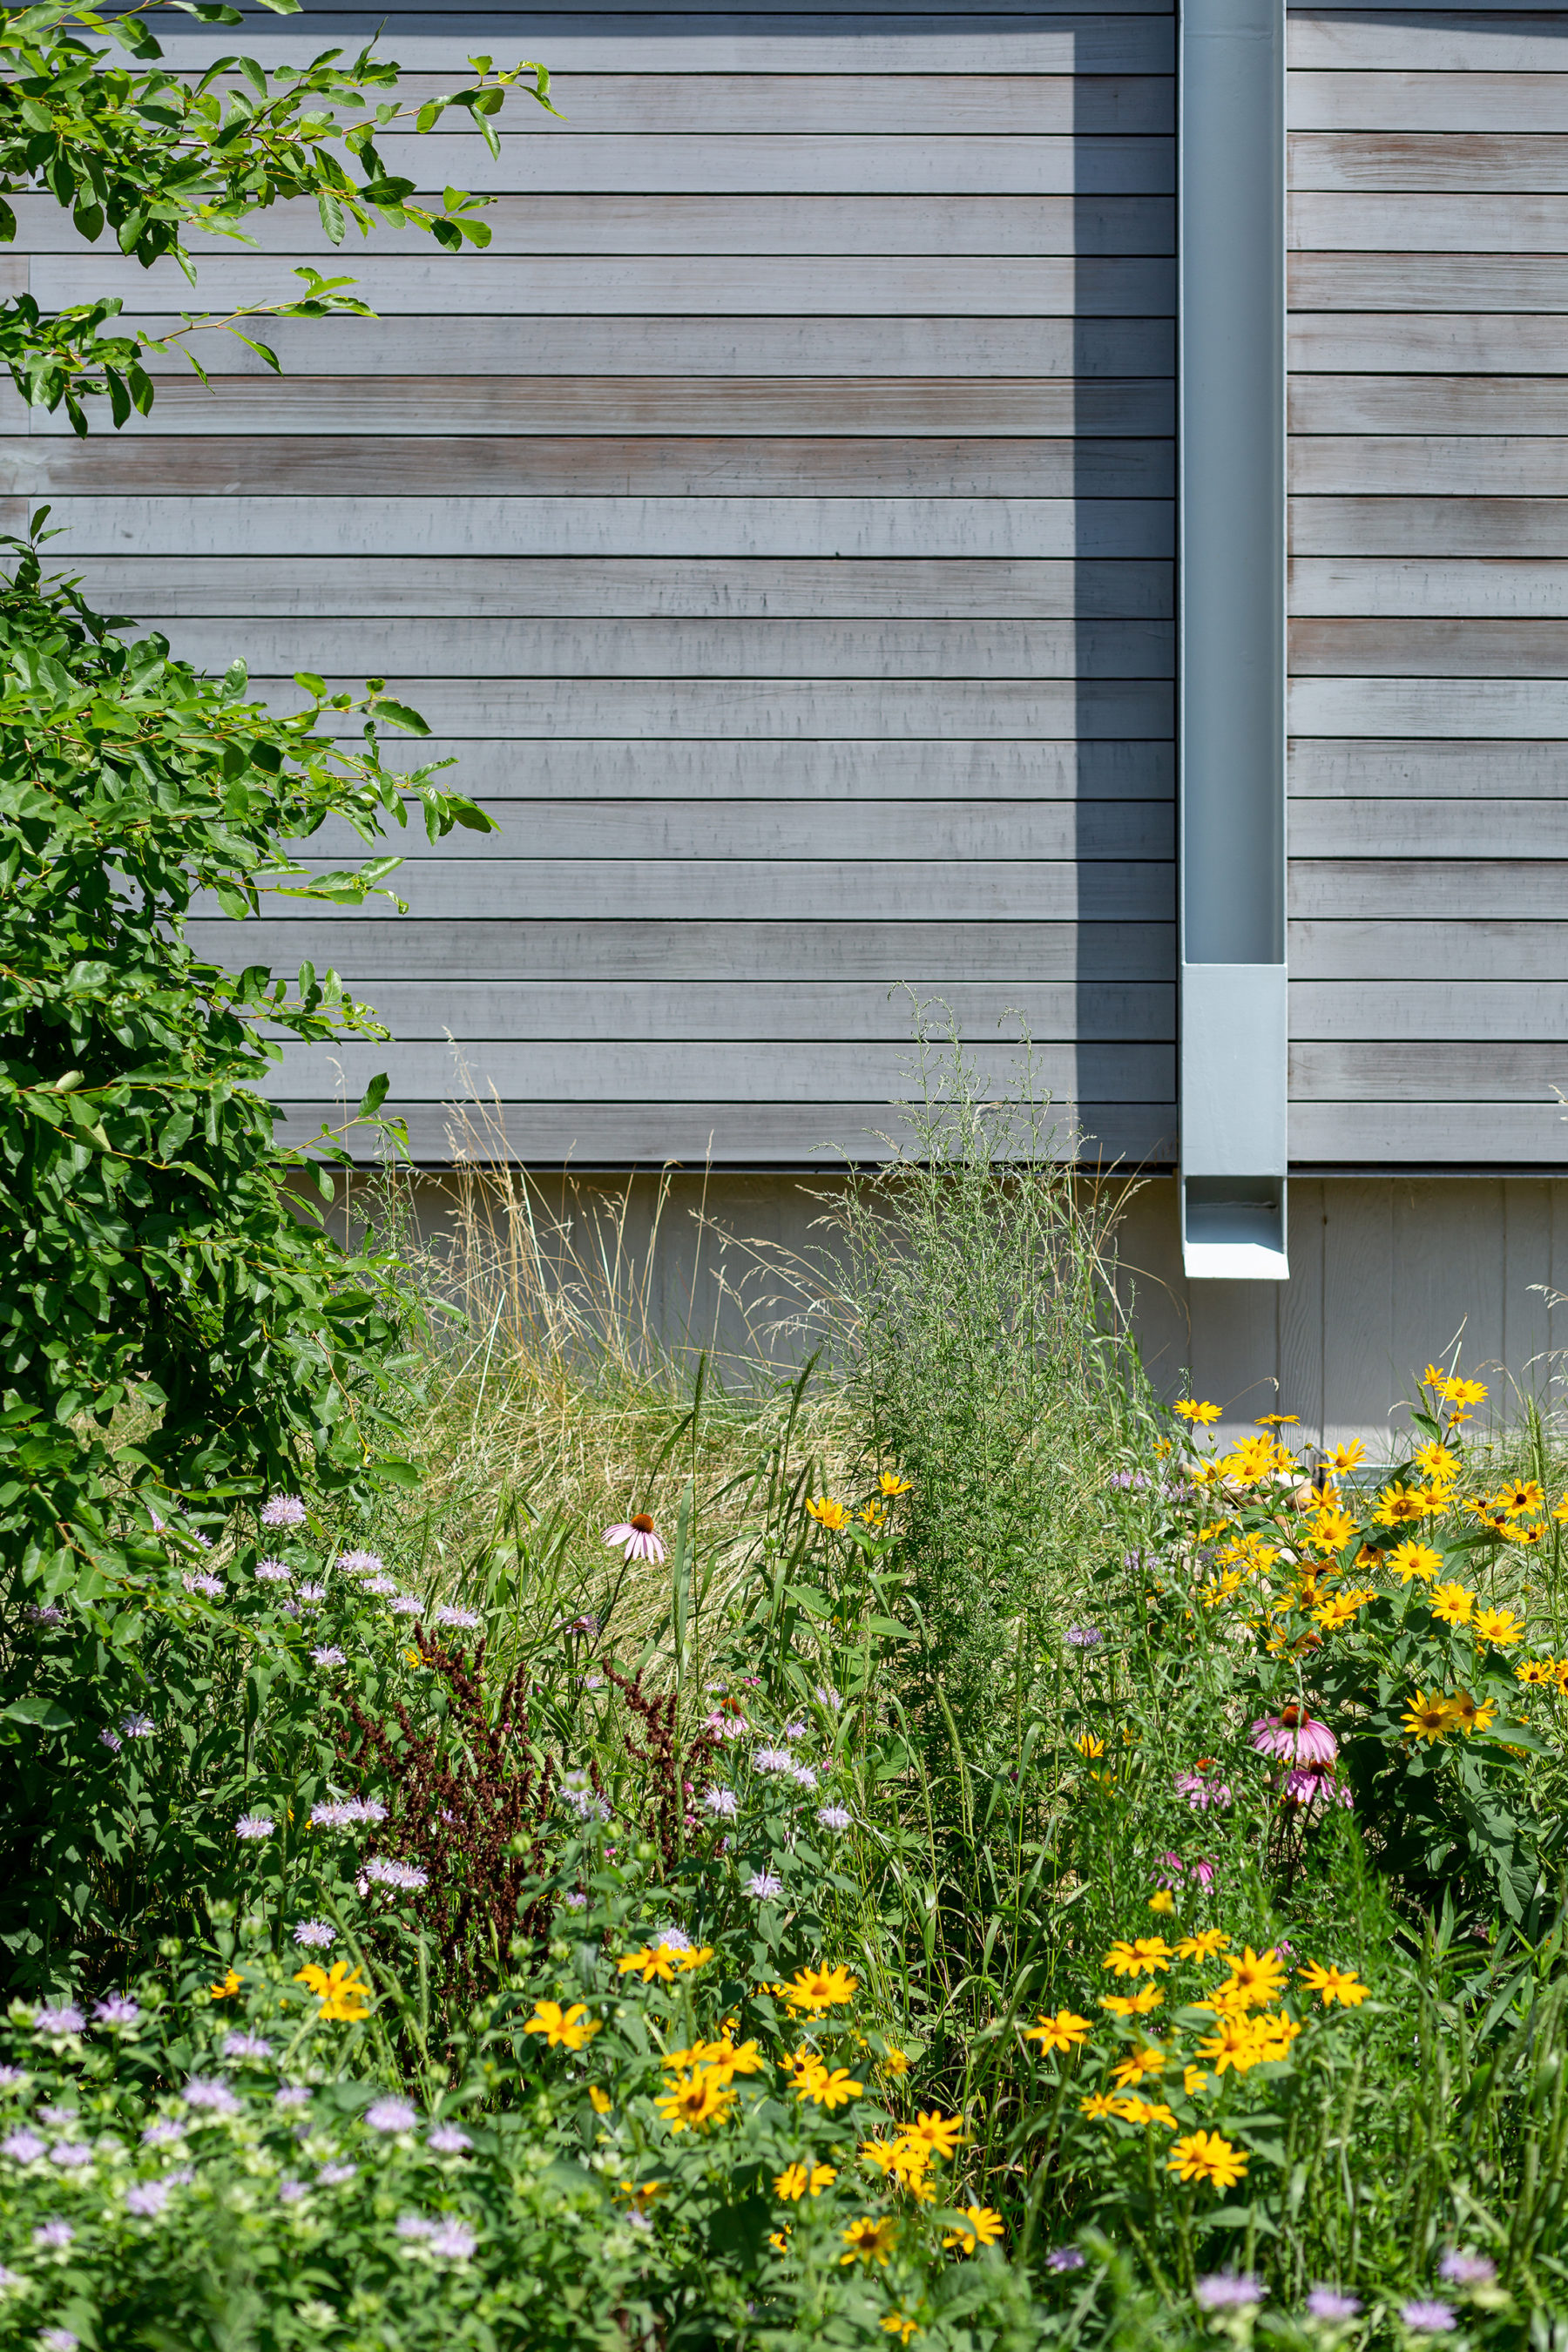 A downspout that channels water directly into the rain garden.